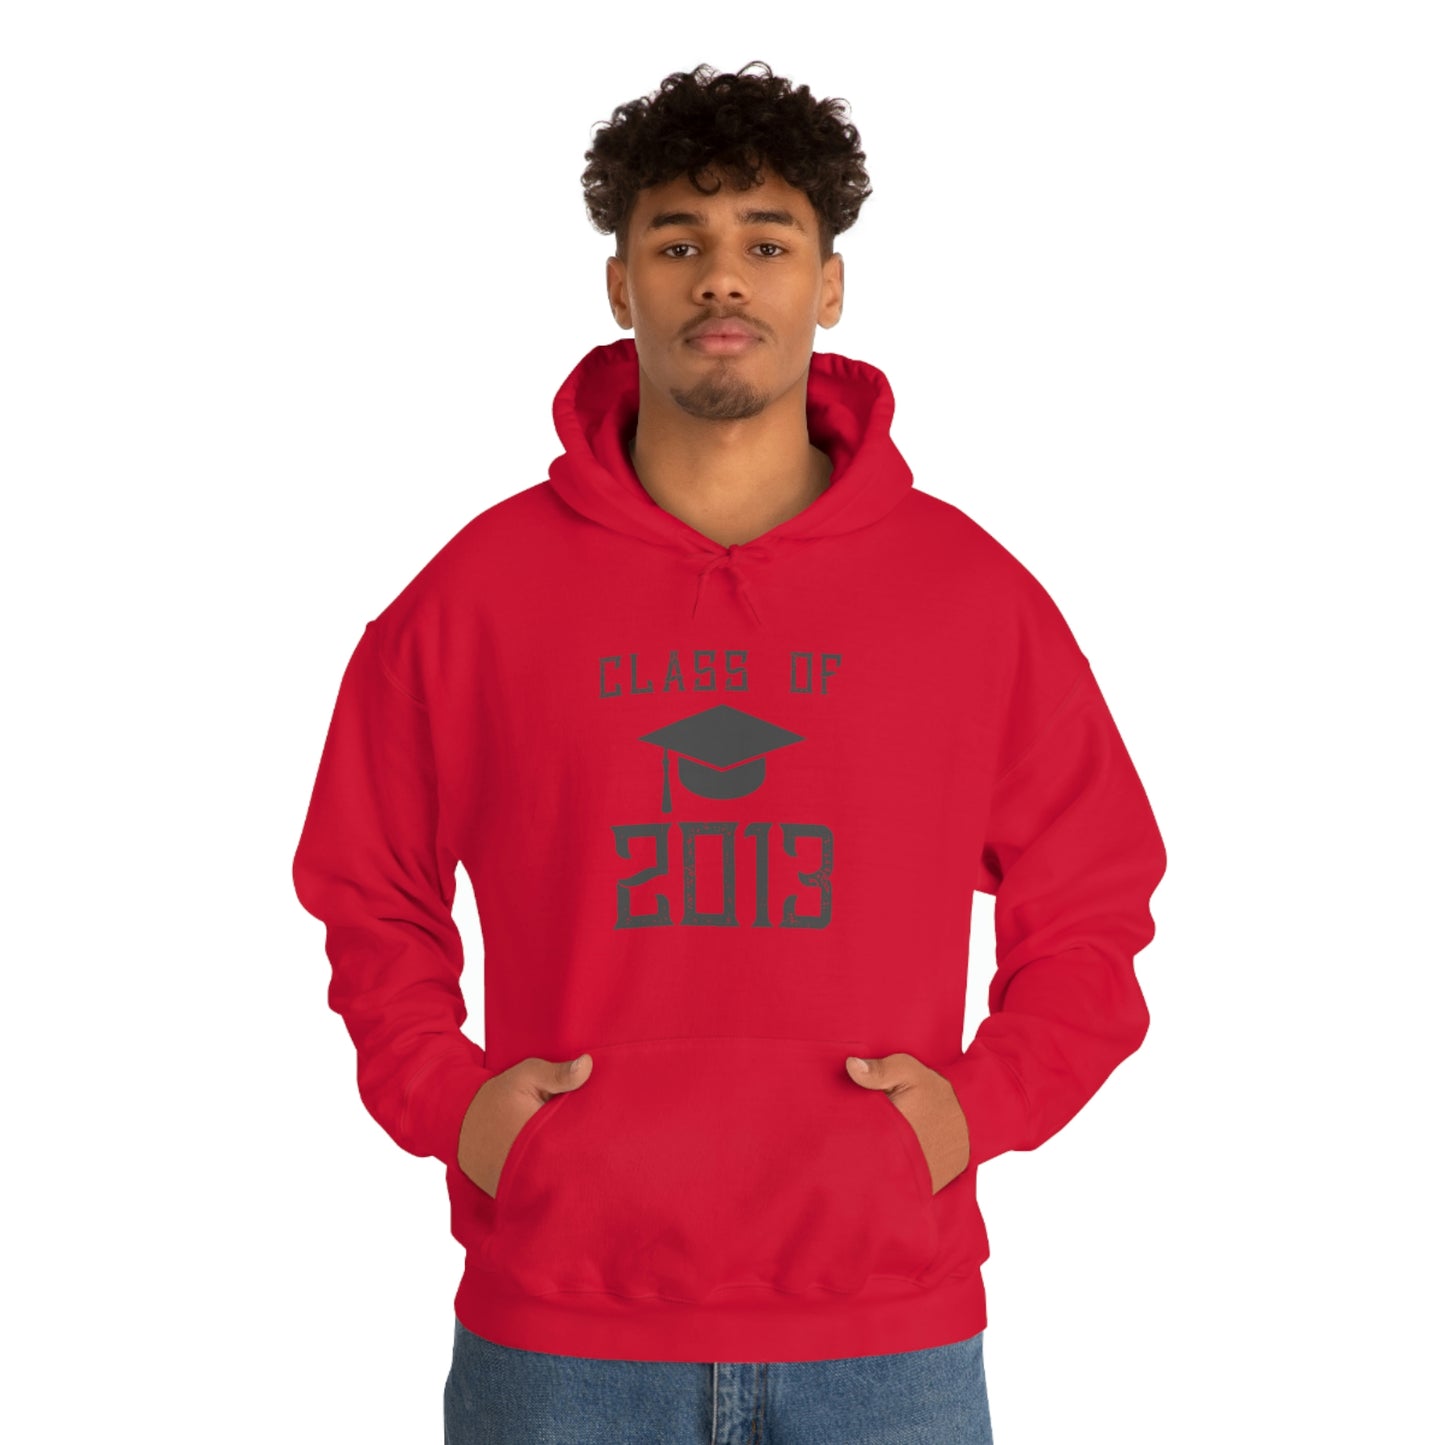 "Class Of 2013" Hoodie - Weave Got Gifts - Unique Gifts You Won’t Find Anywhere Else!